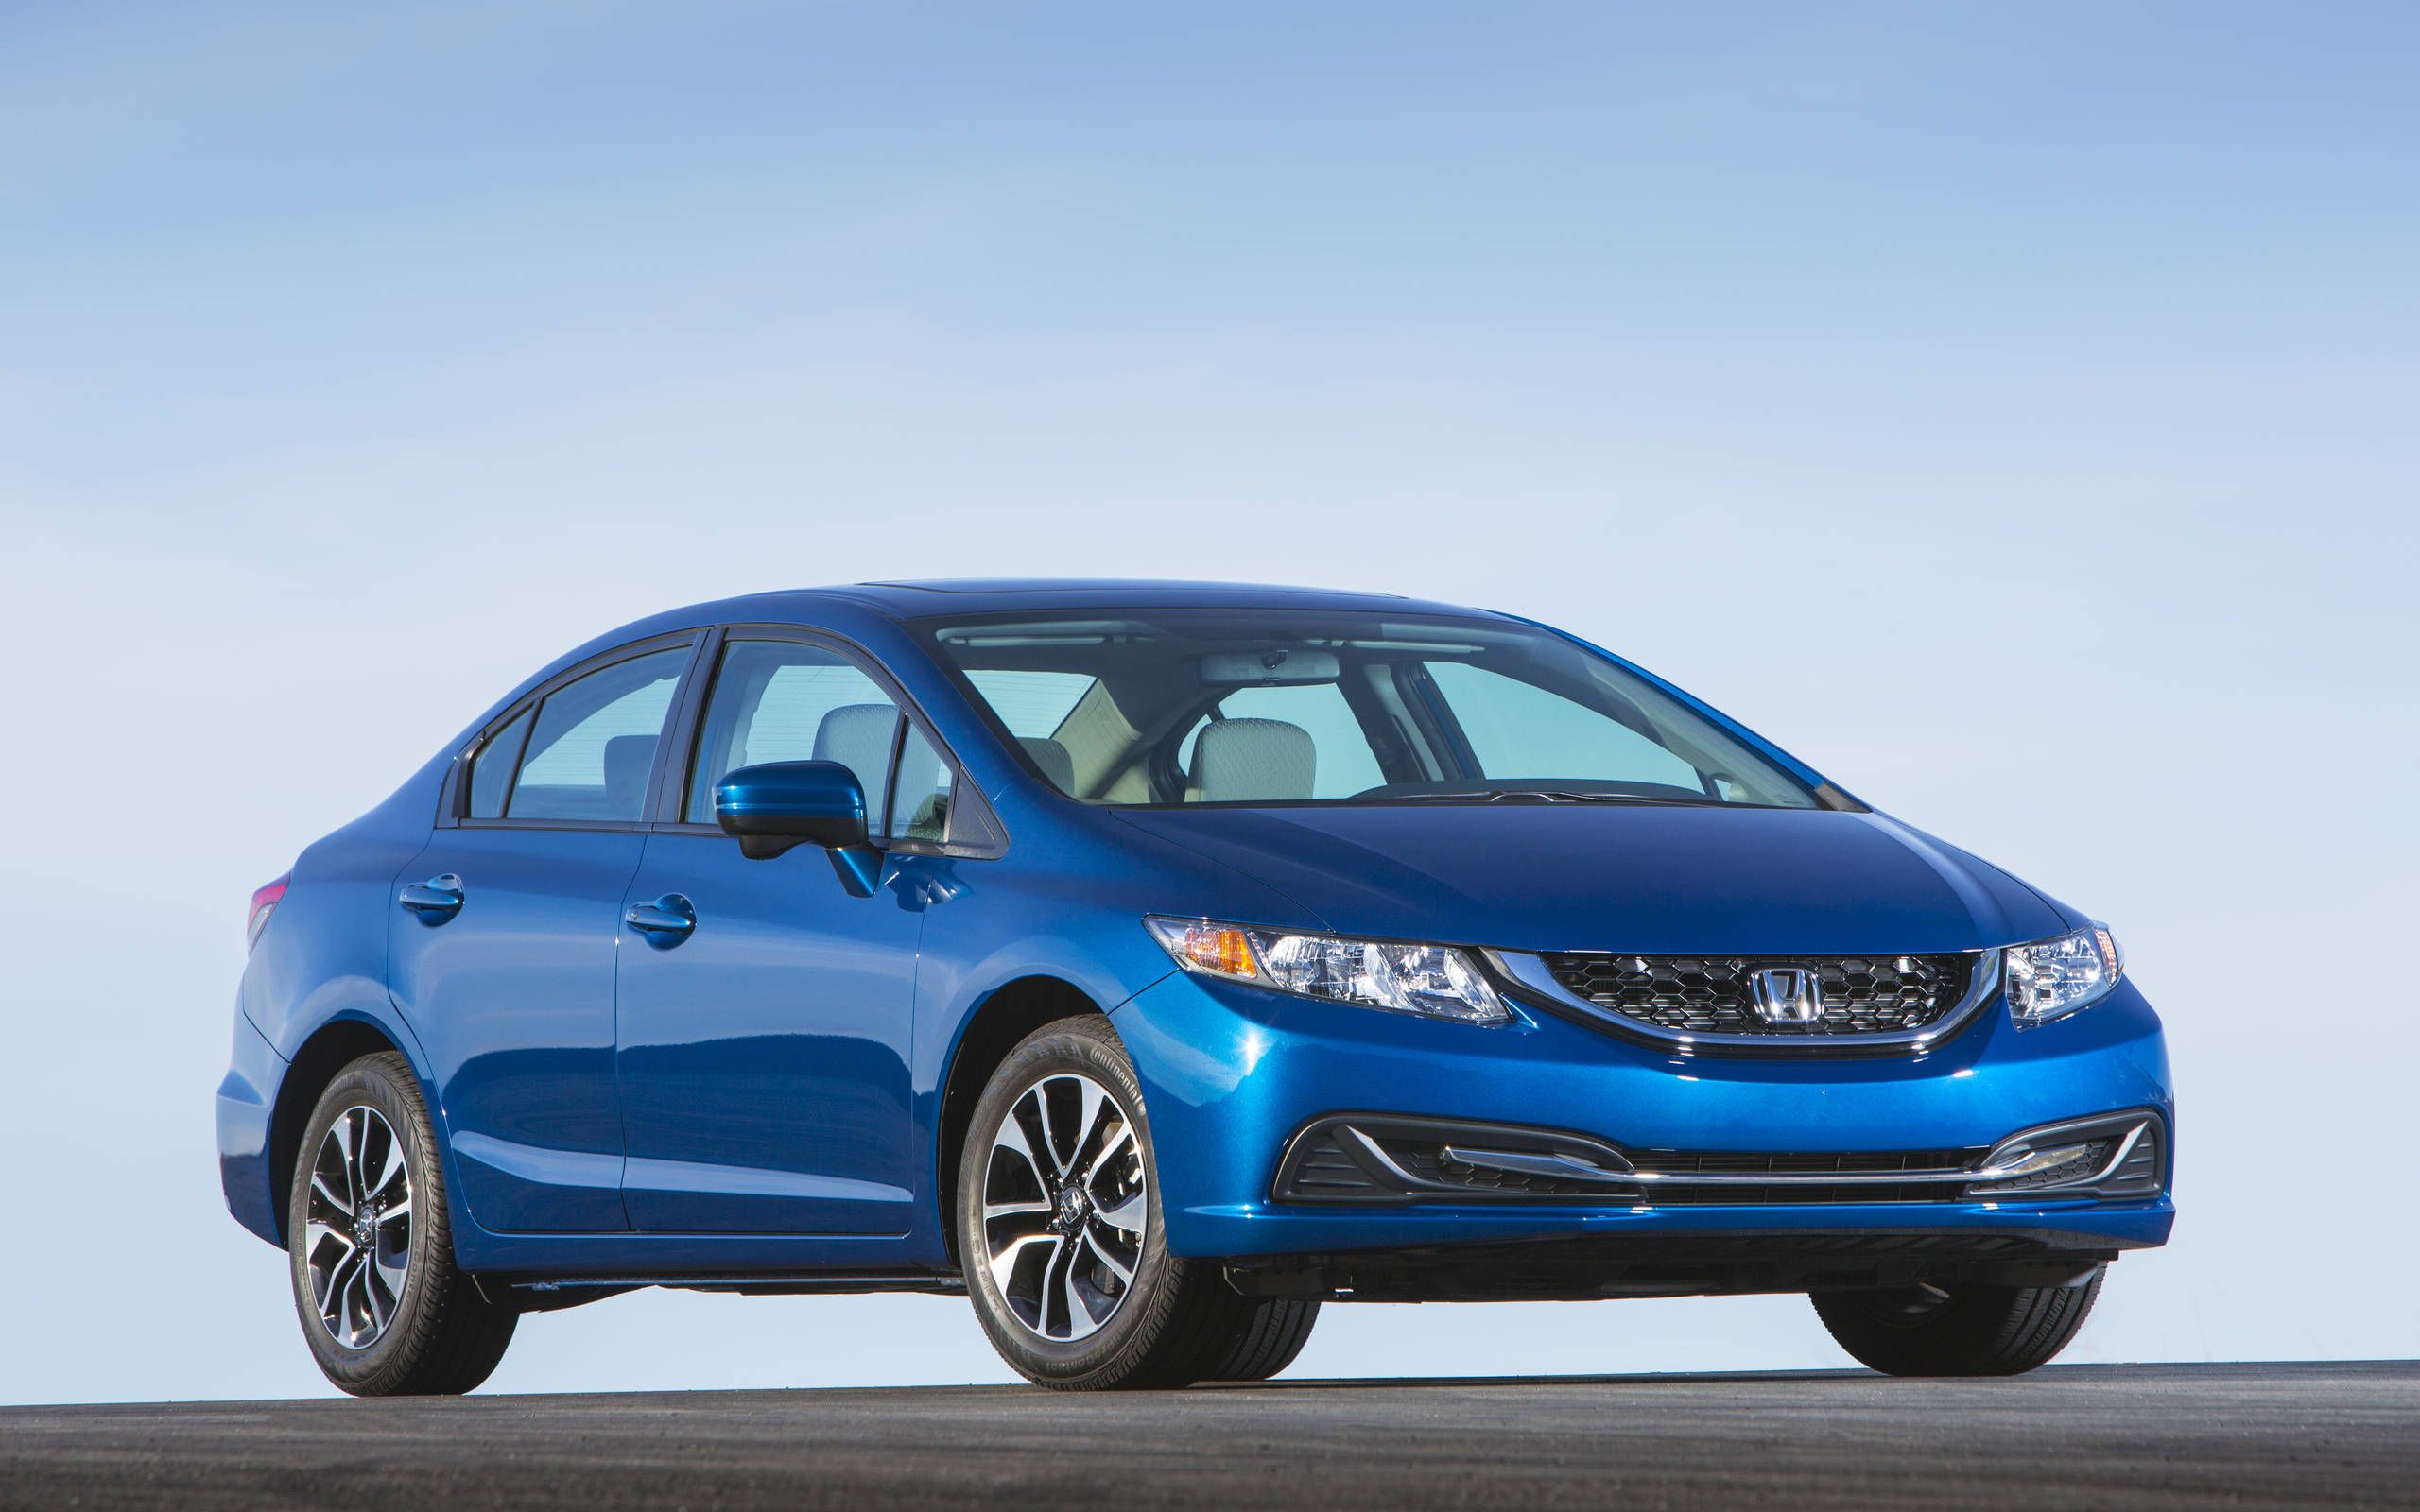 2014 Honda Civic Si Coupe review notes